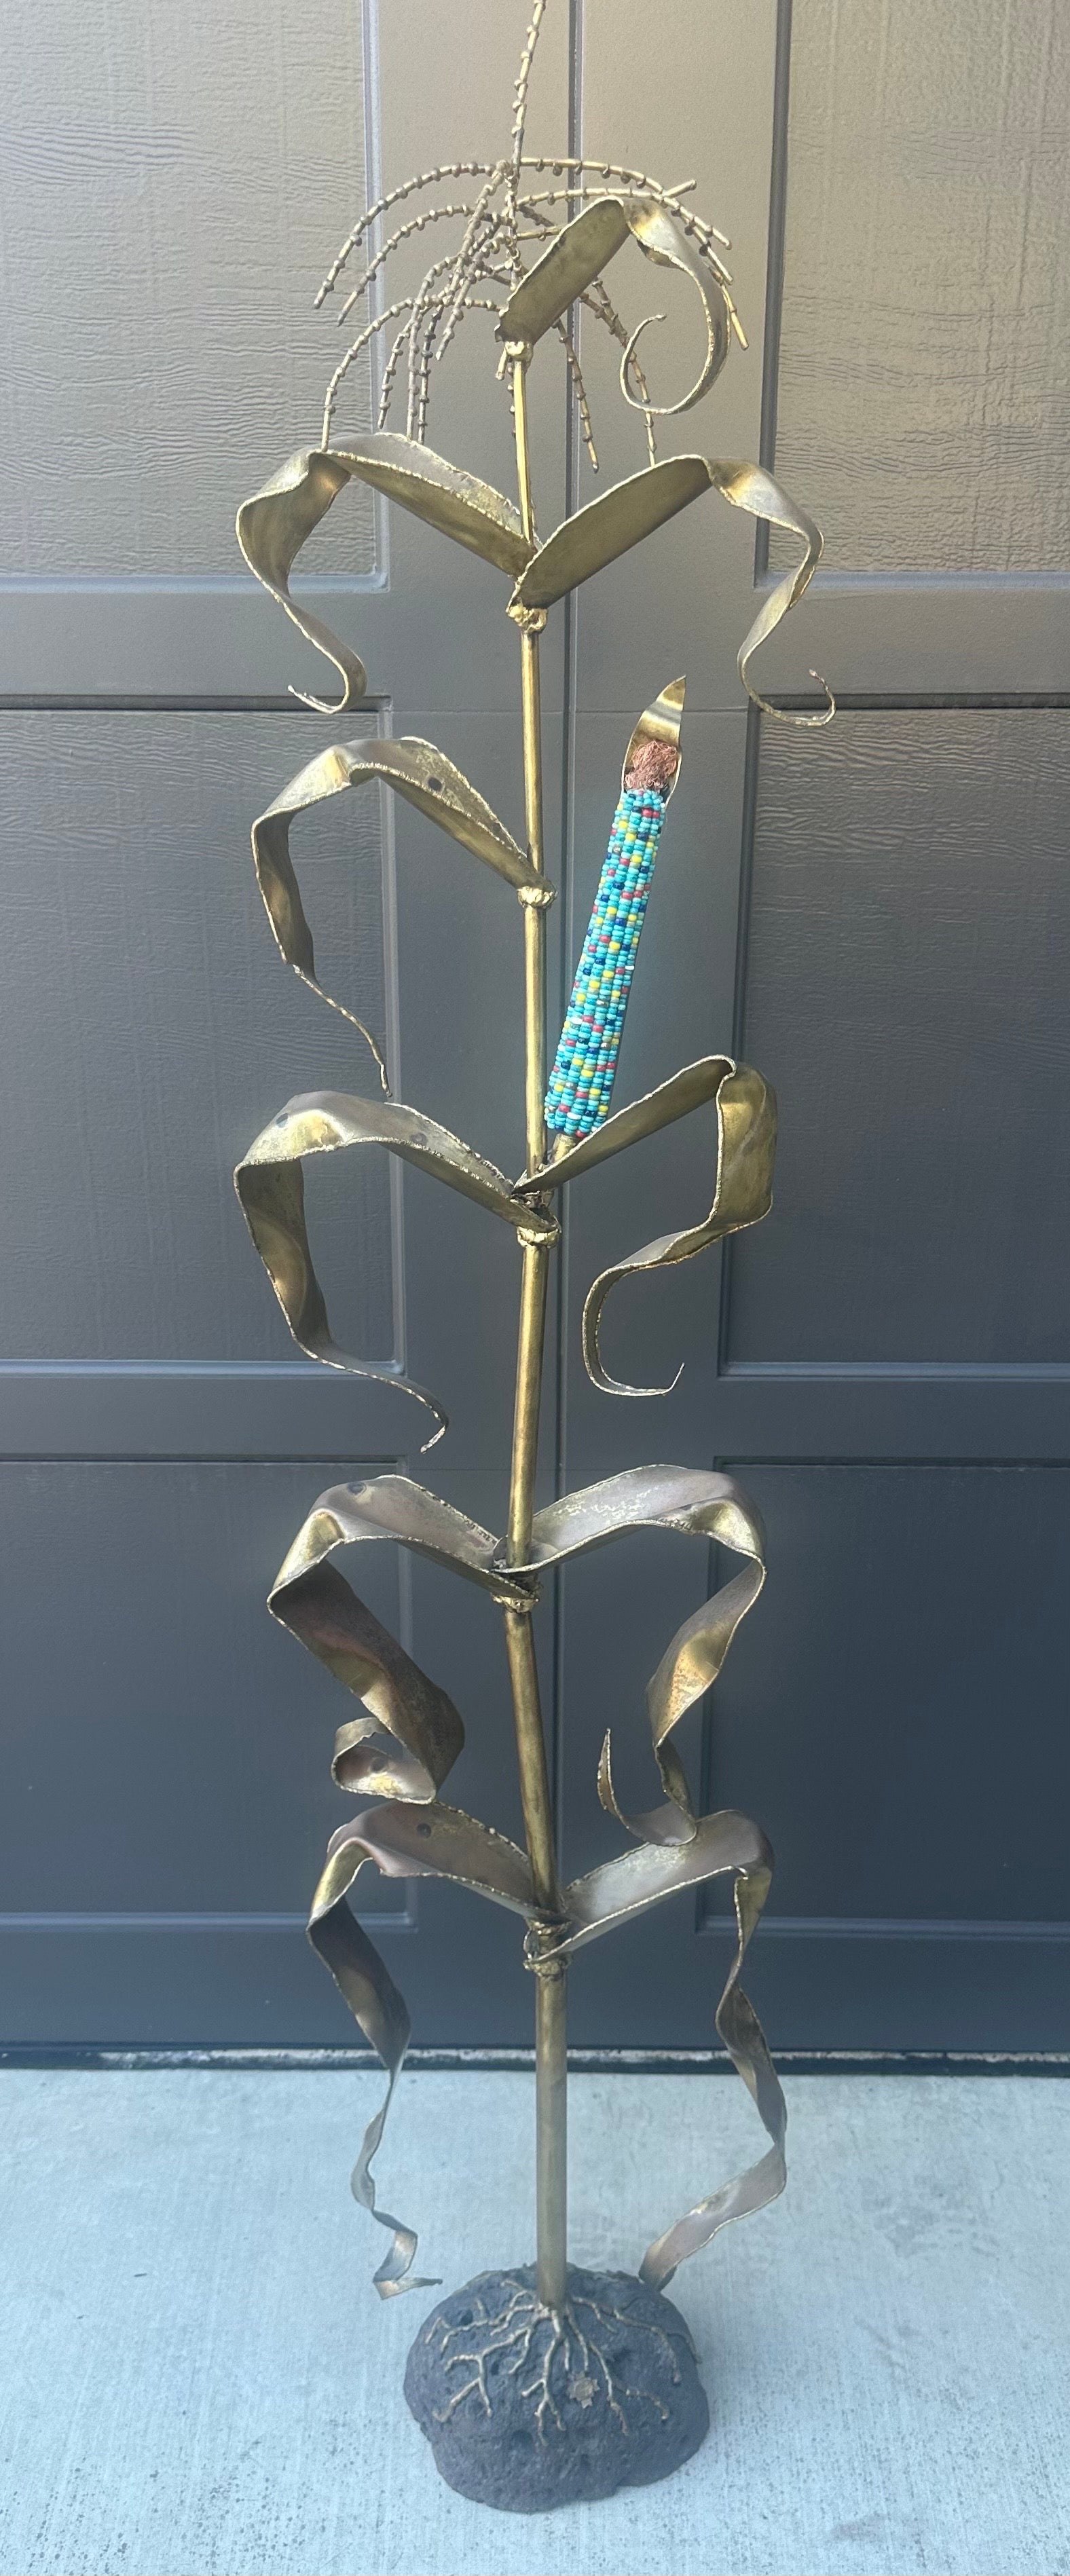 Bronze Corn Stalk with Turquoise Ear Sculpture by Charles Pratt For Sale 1